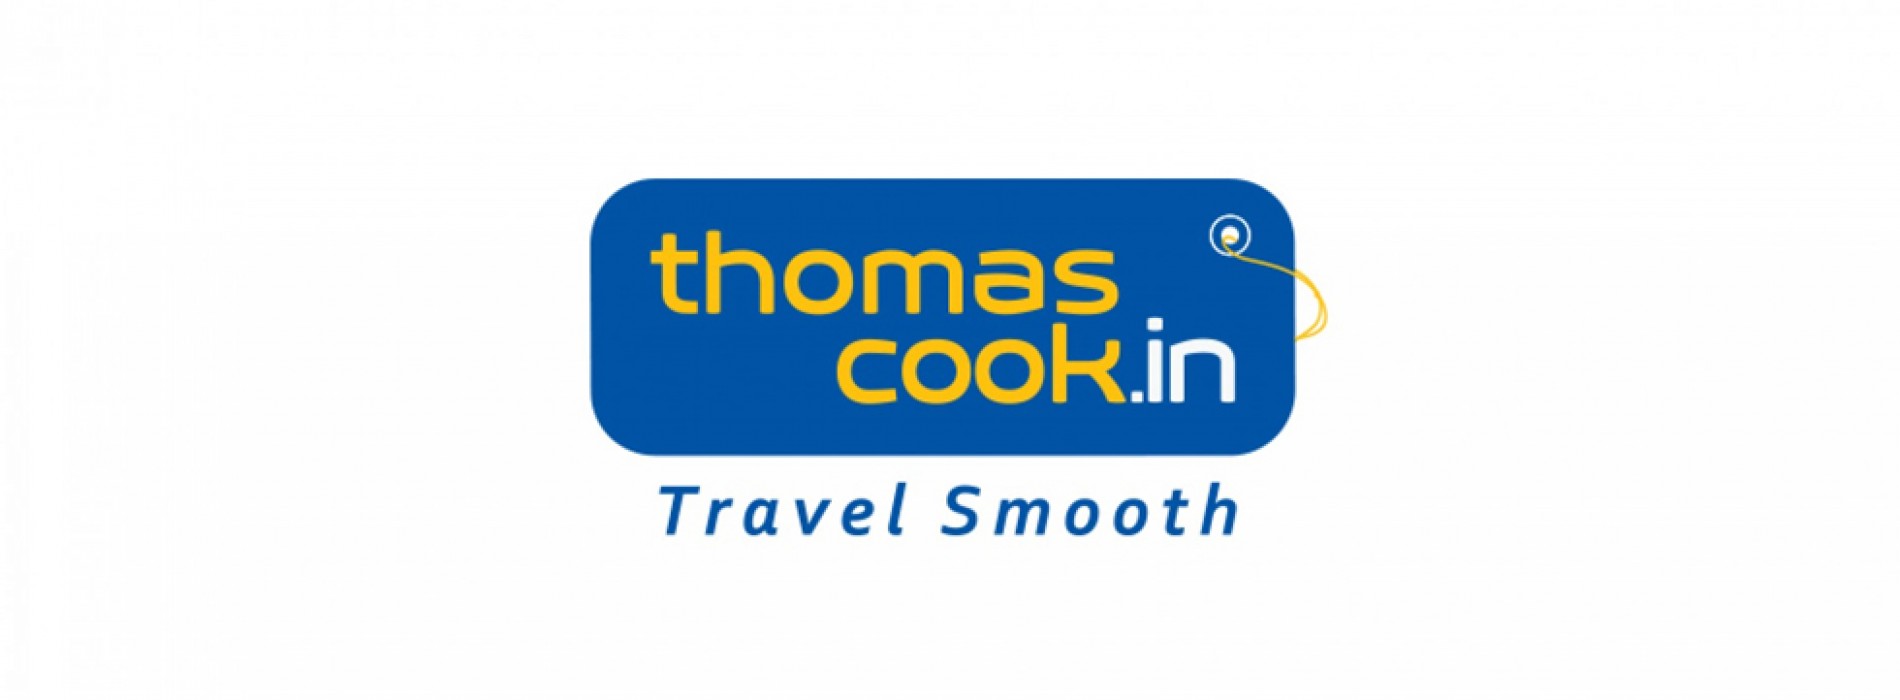 Thomas Cook India goes Local to target the strong leisure segment in smaller catchment markets